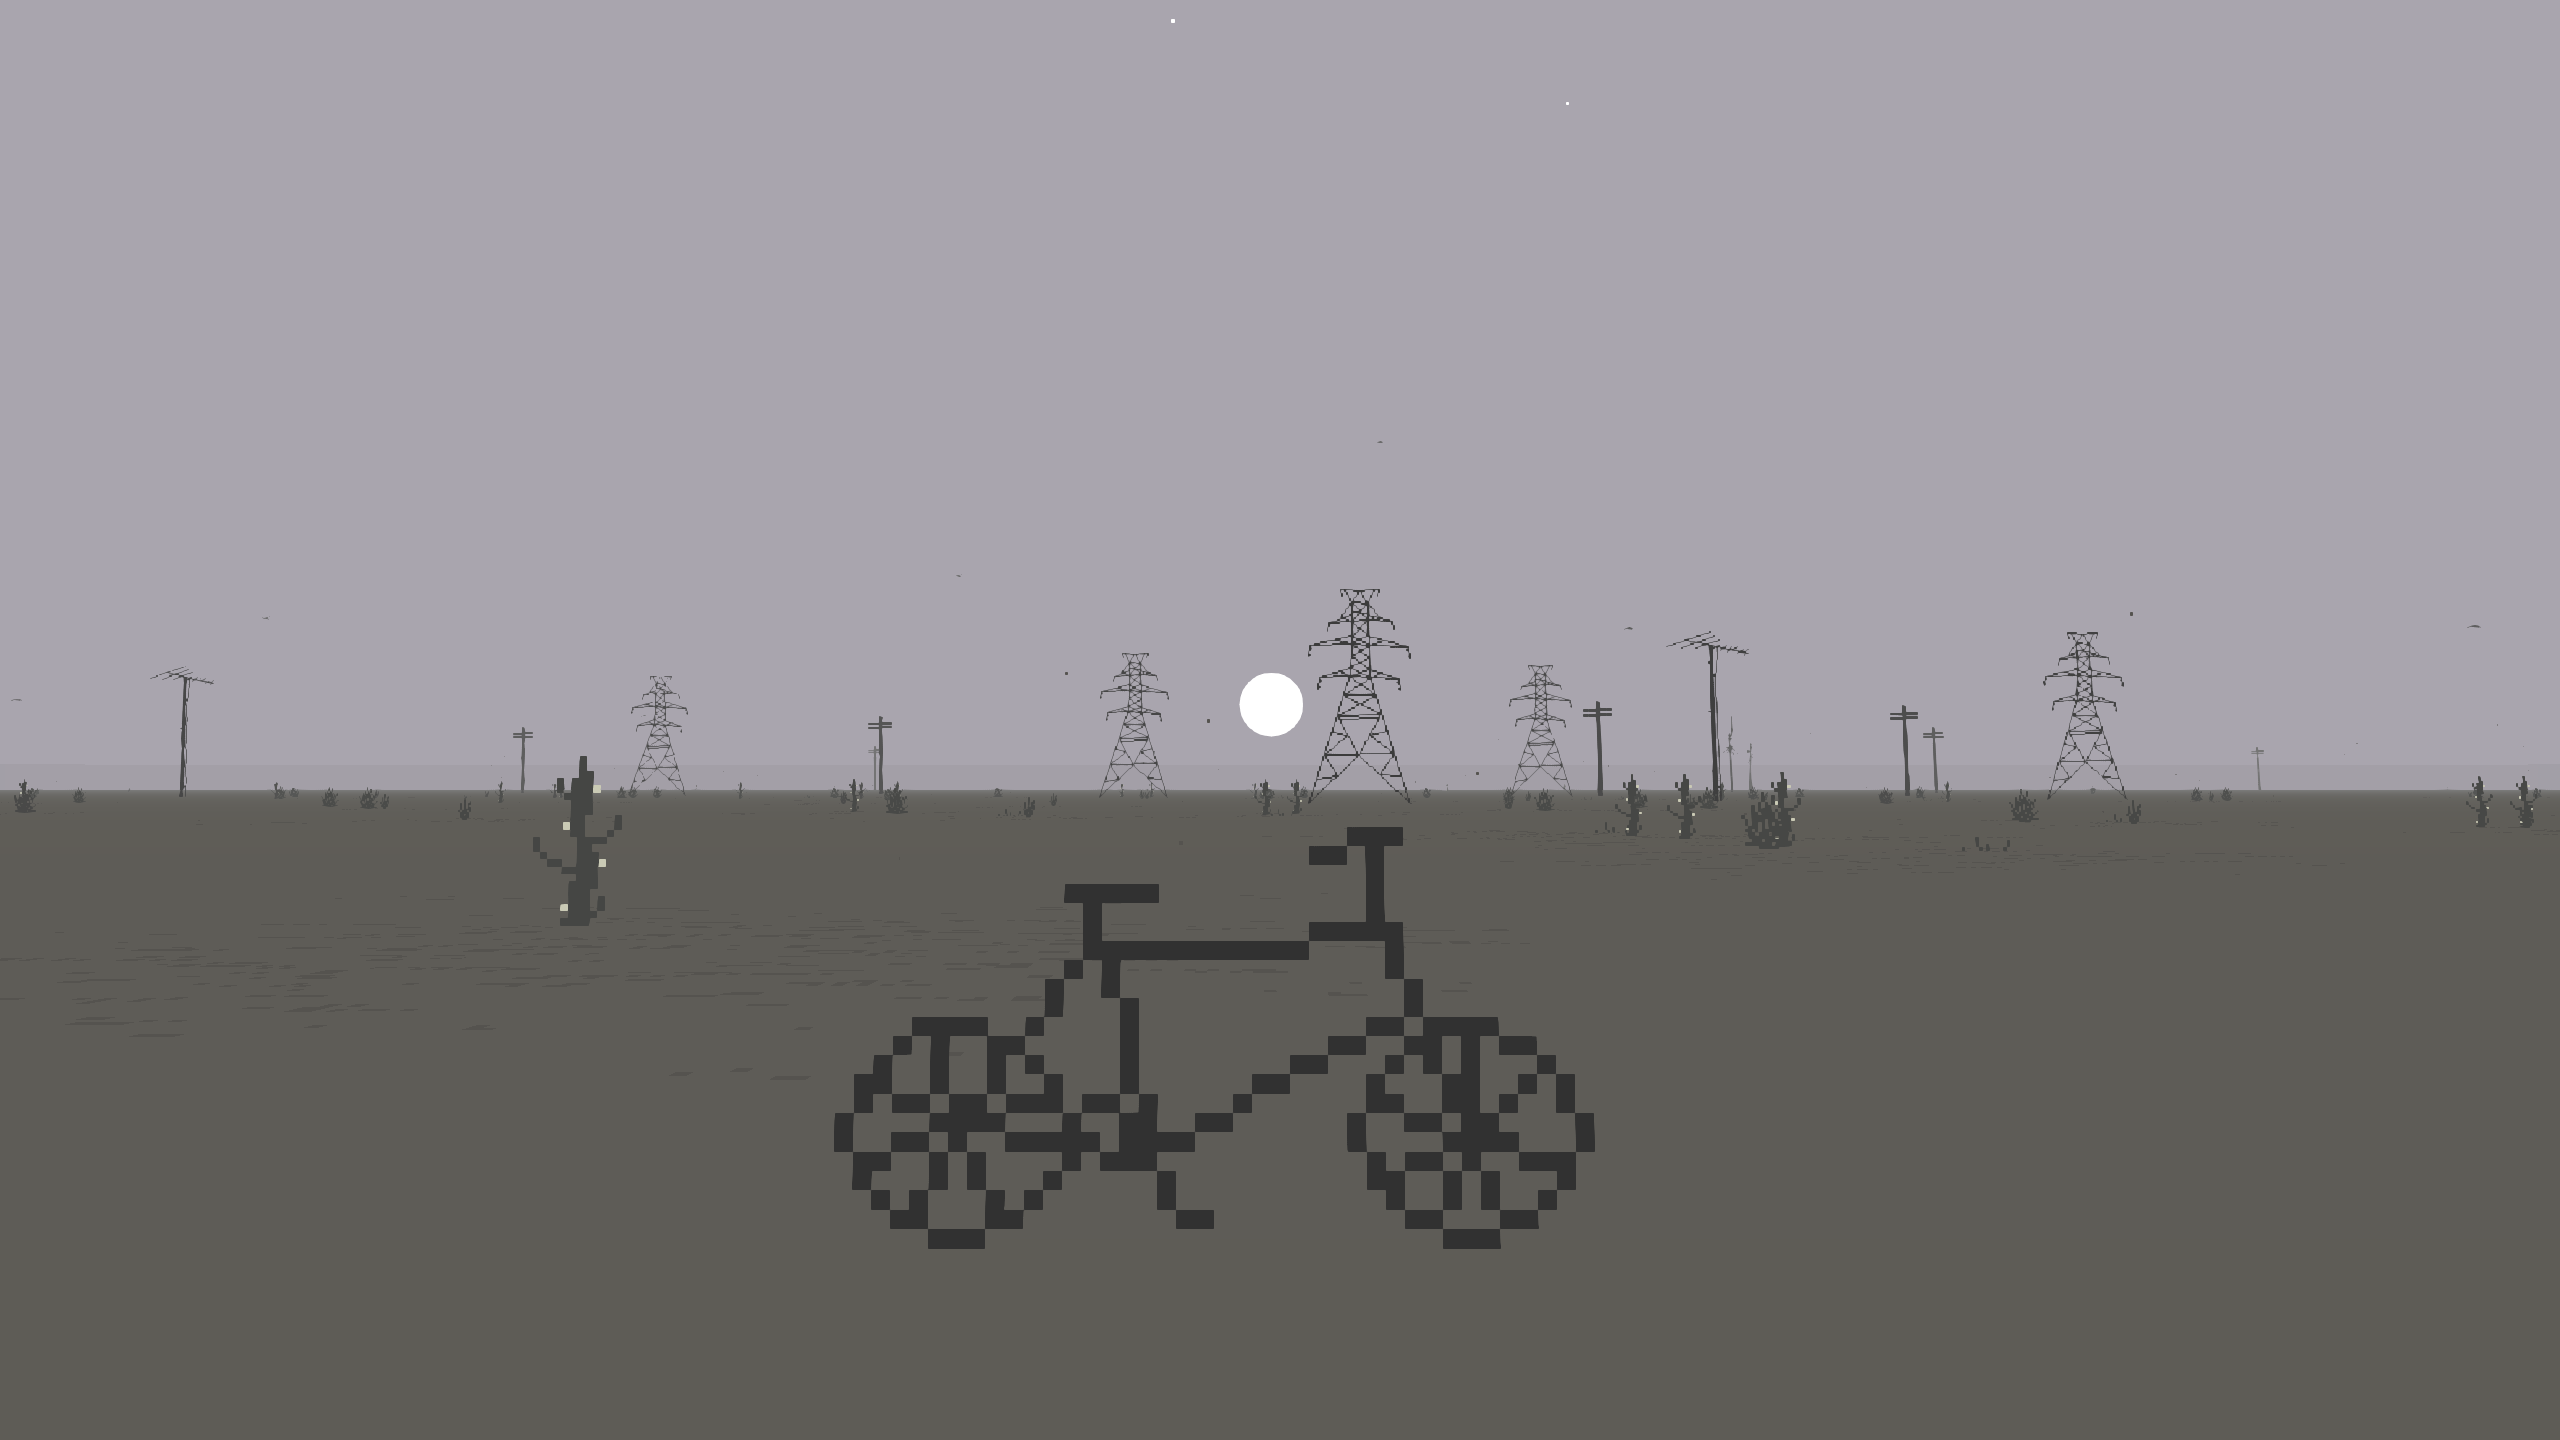 The Bird Snapper screenshot shows a bicycle loaded with pylons and antennae in a gray desert.